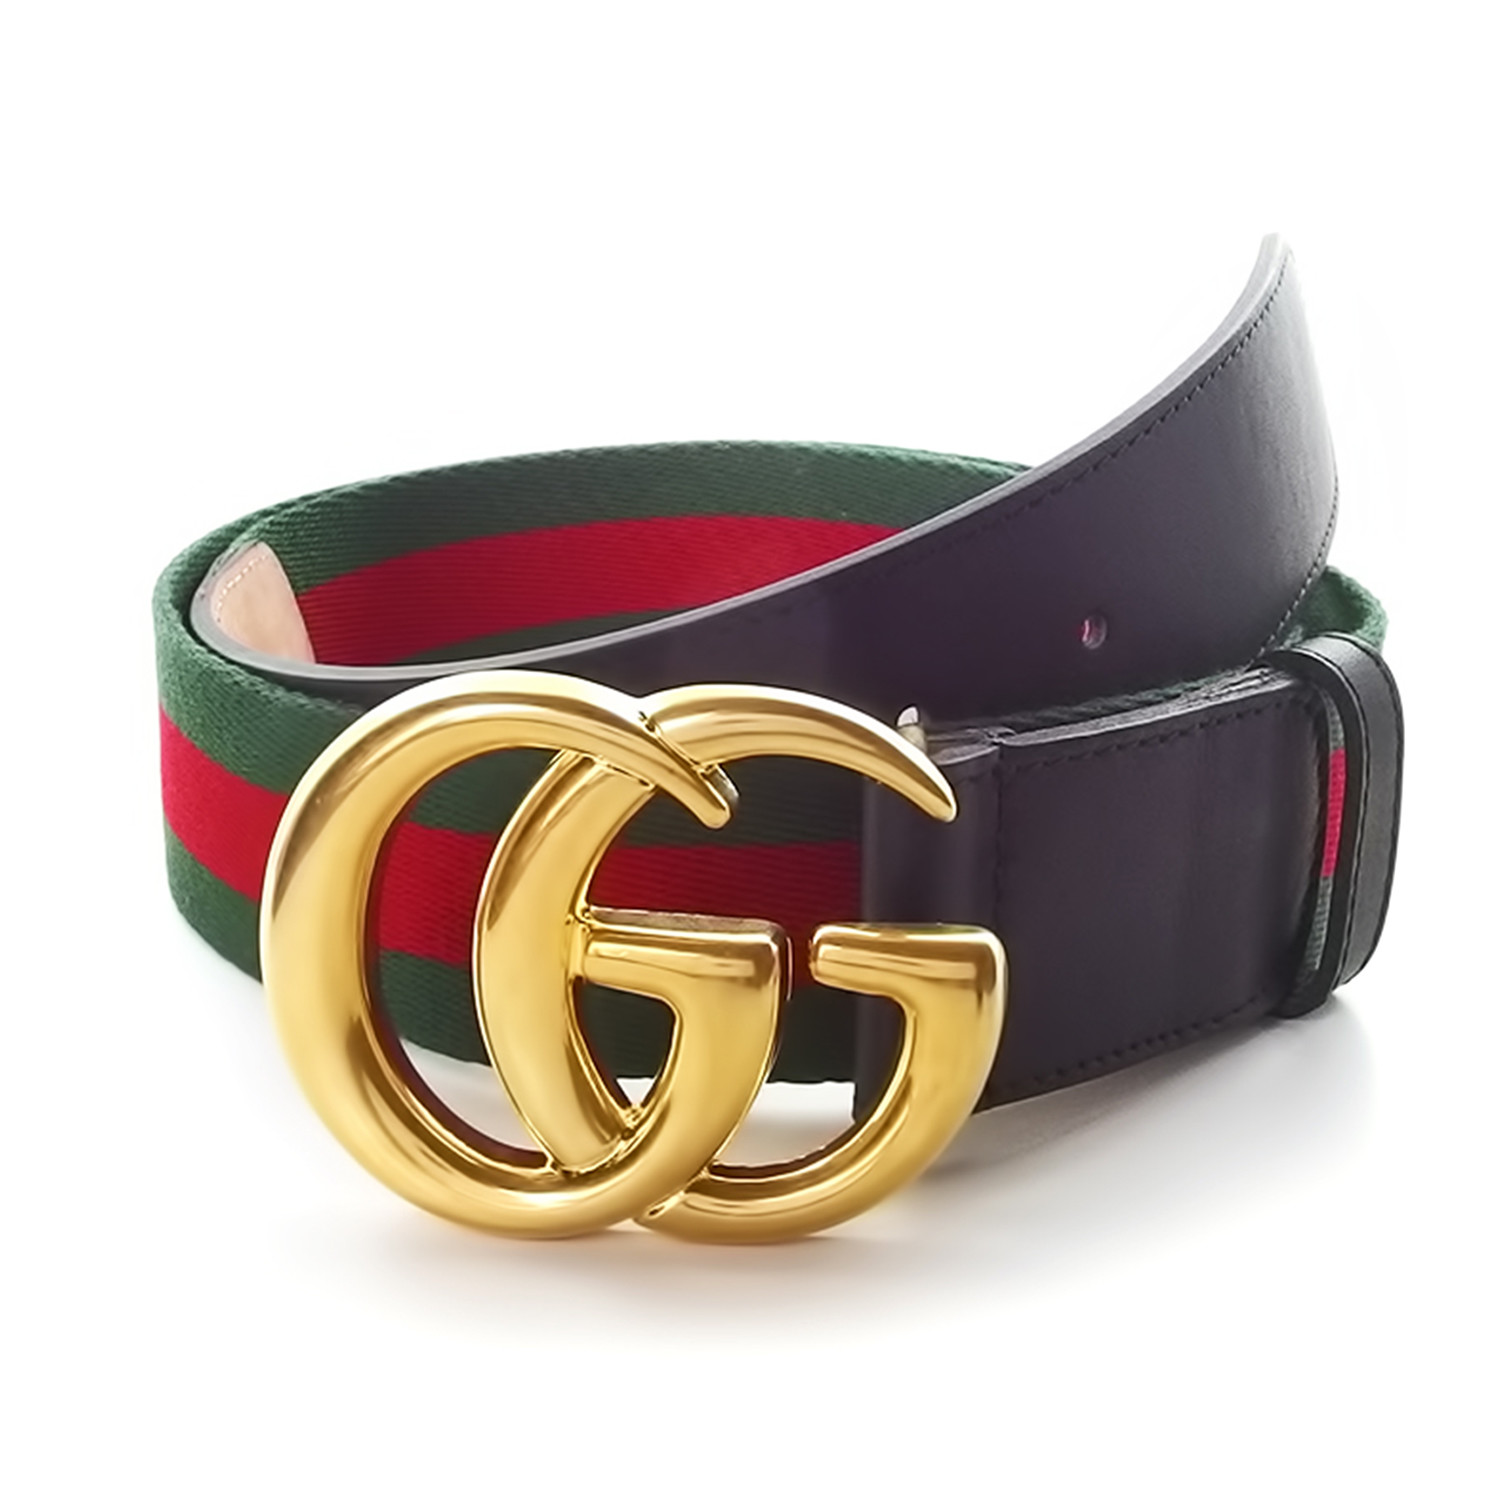 AJF.gucci belt red and green gold buckle,OFF 59% - www.concordehotels ...